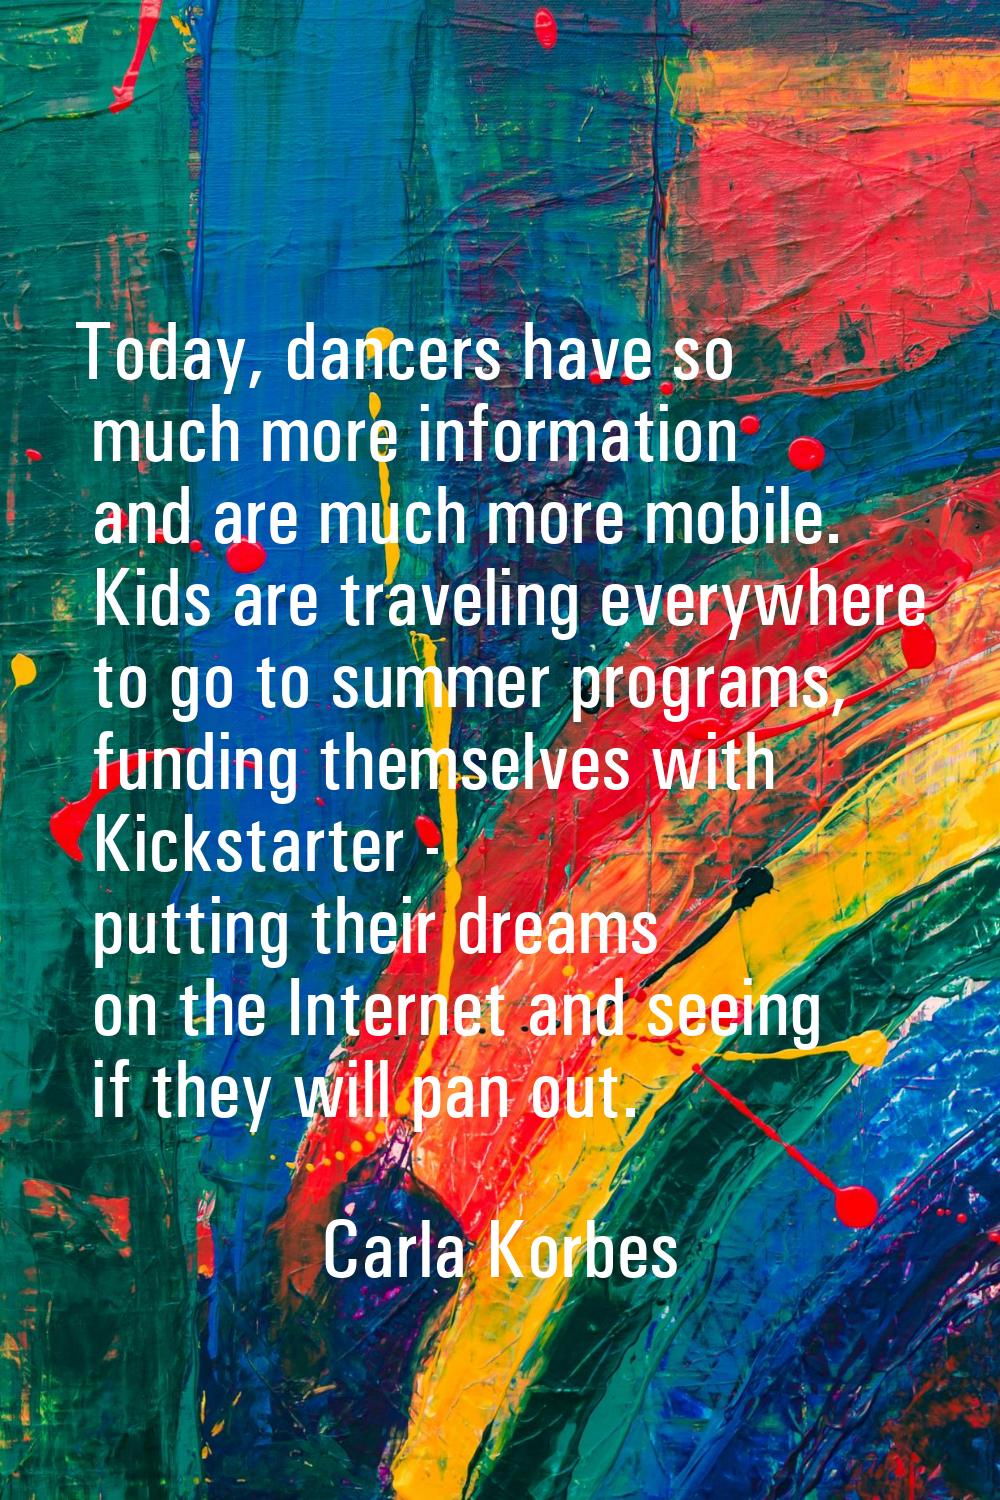 Today, dancers have so much more information and are much more mobile. Kids are traveling everywher